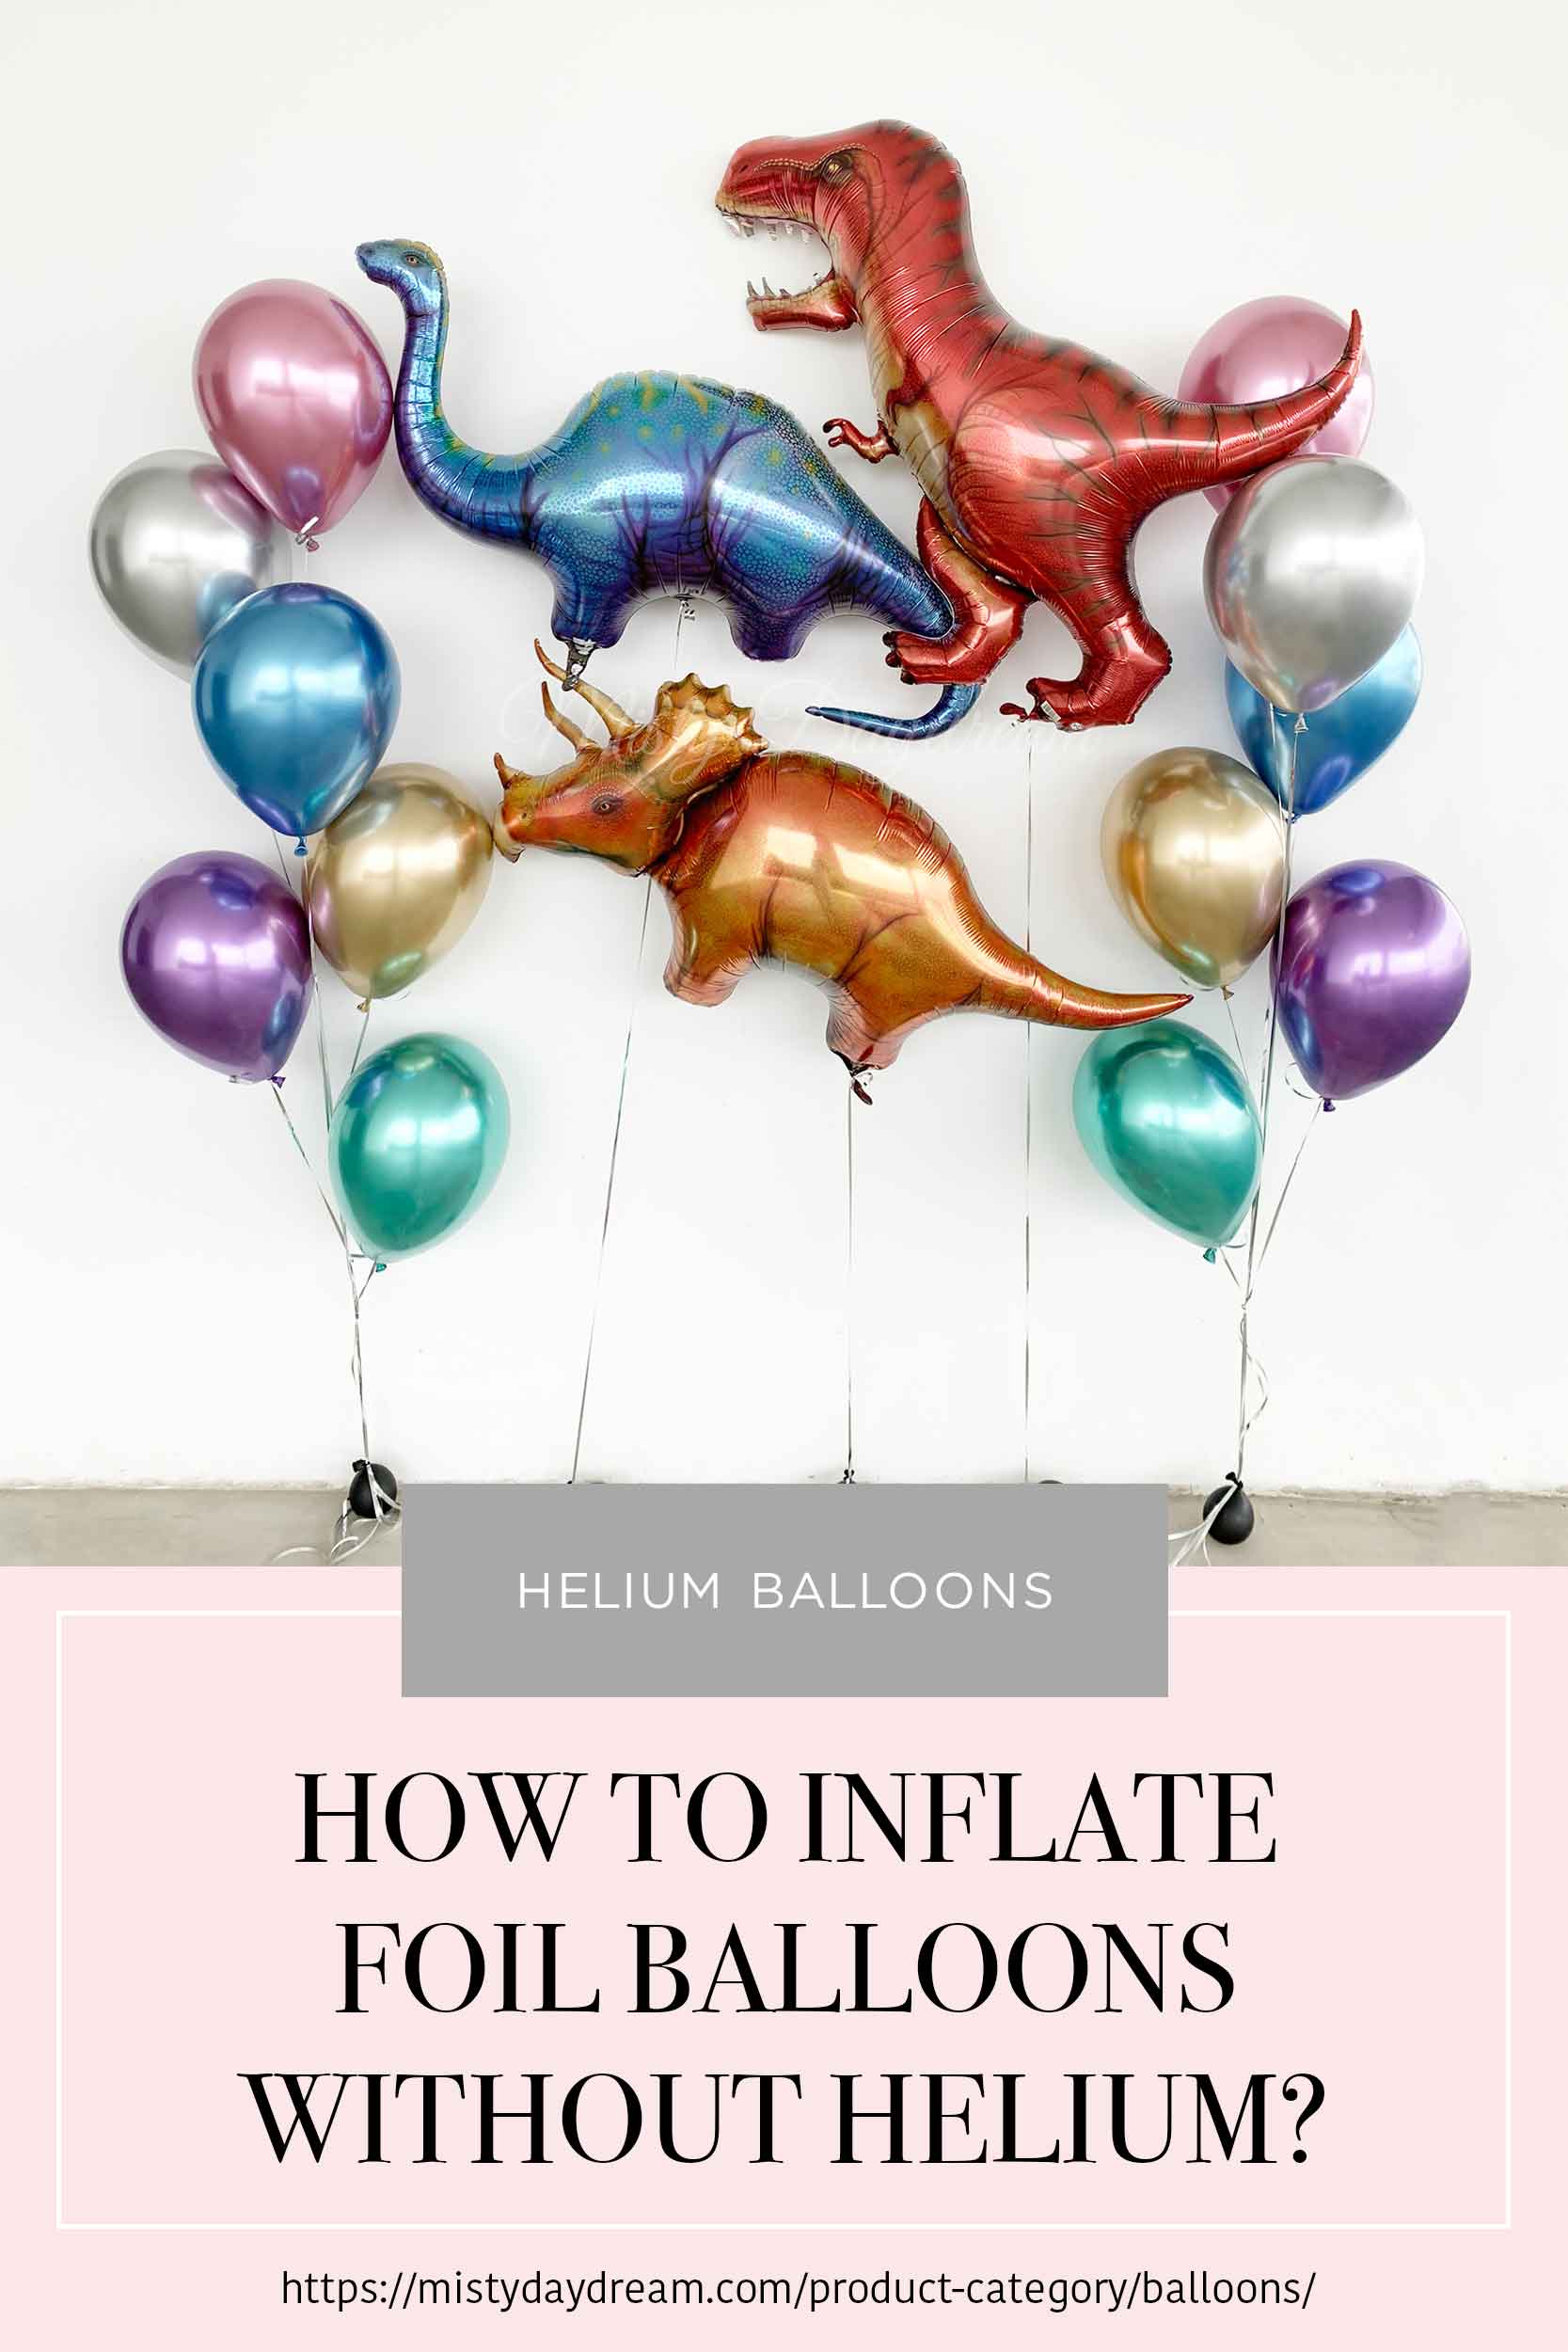 Geaccepteerd Kust Geplooid How to inflate Foil Balloons without Helium? - Misty Daydream